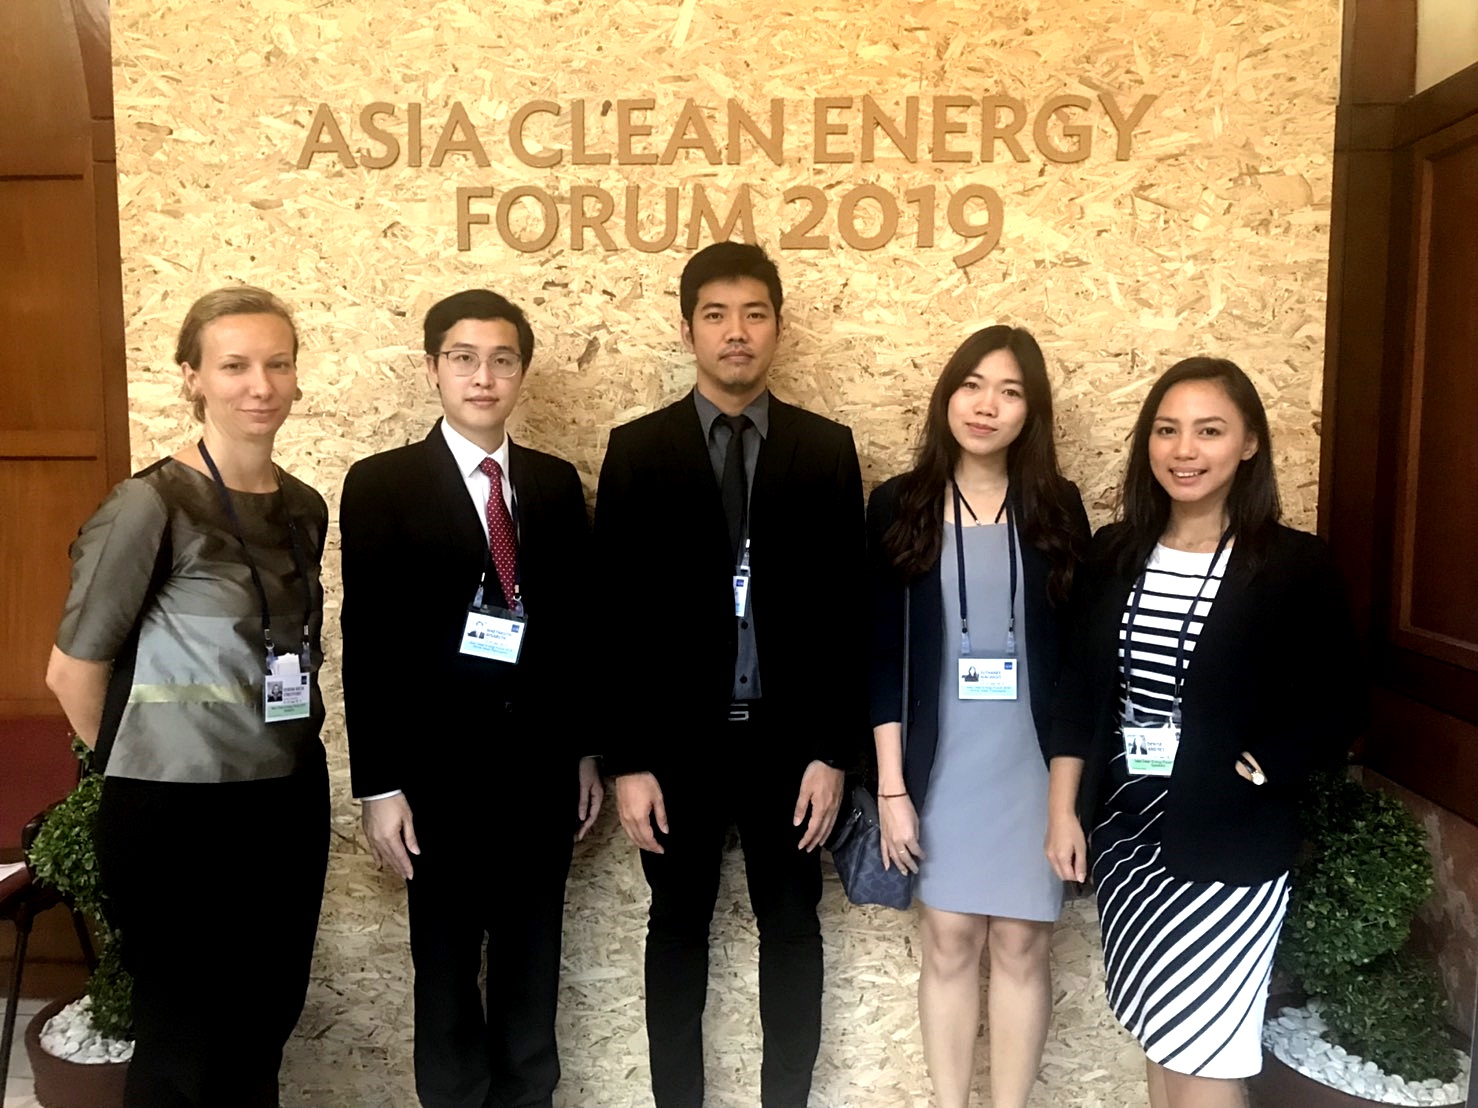 Asia Clean Energy Forum 2019: Increasing the scale of clean energy implementation